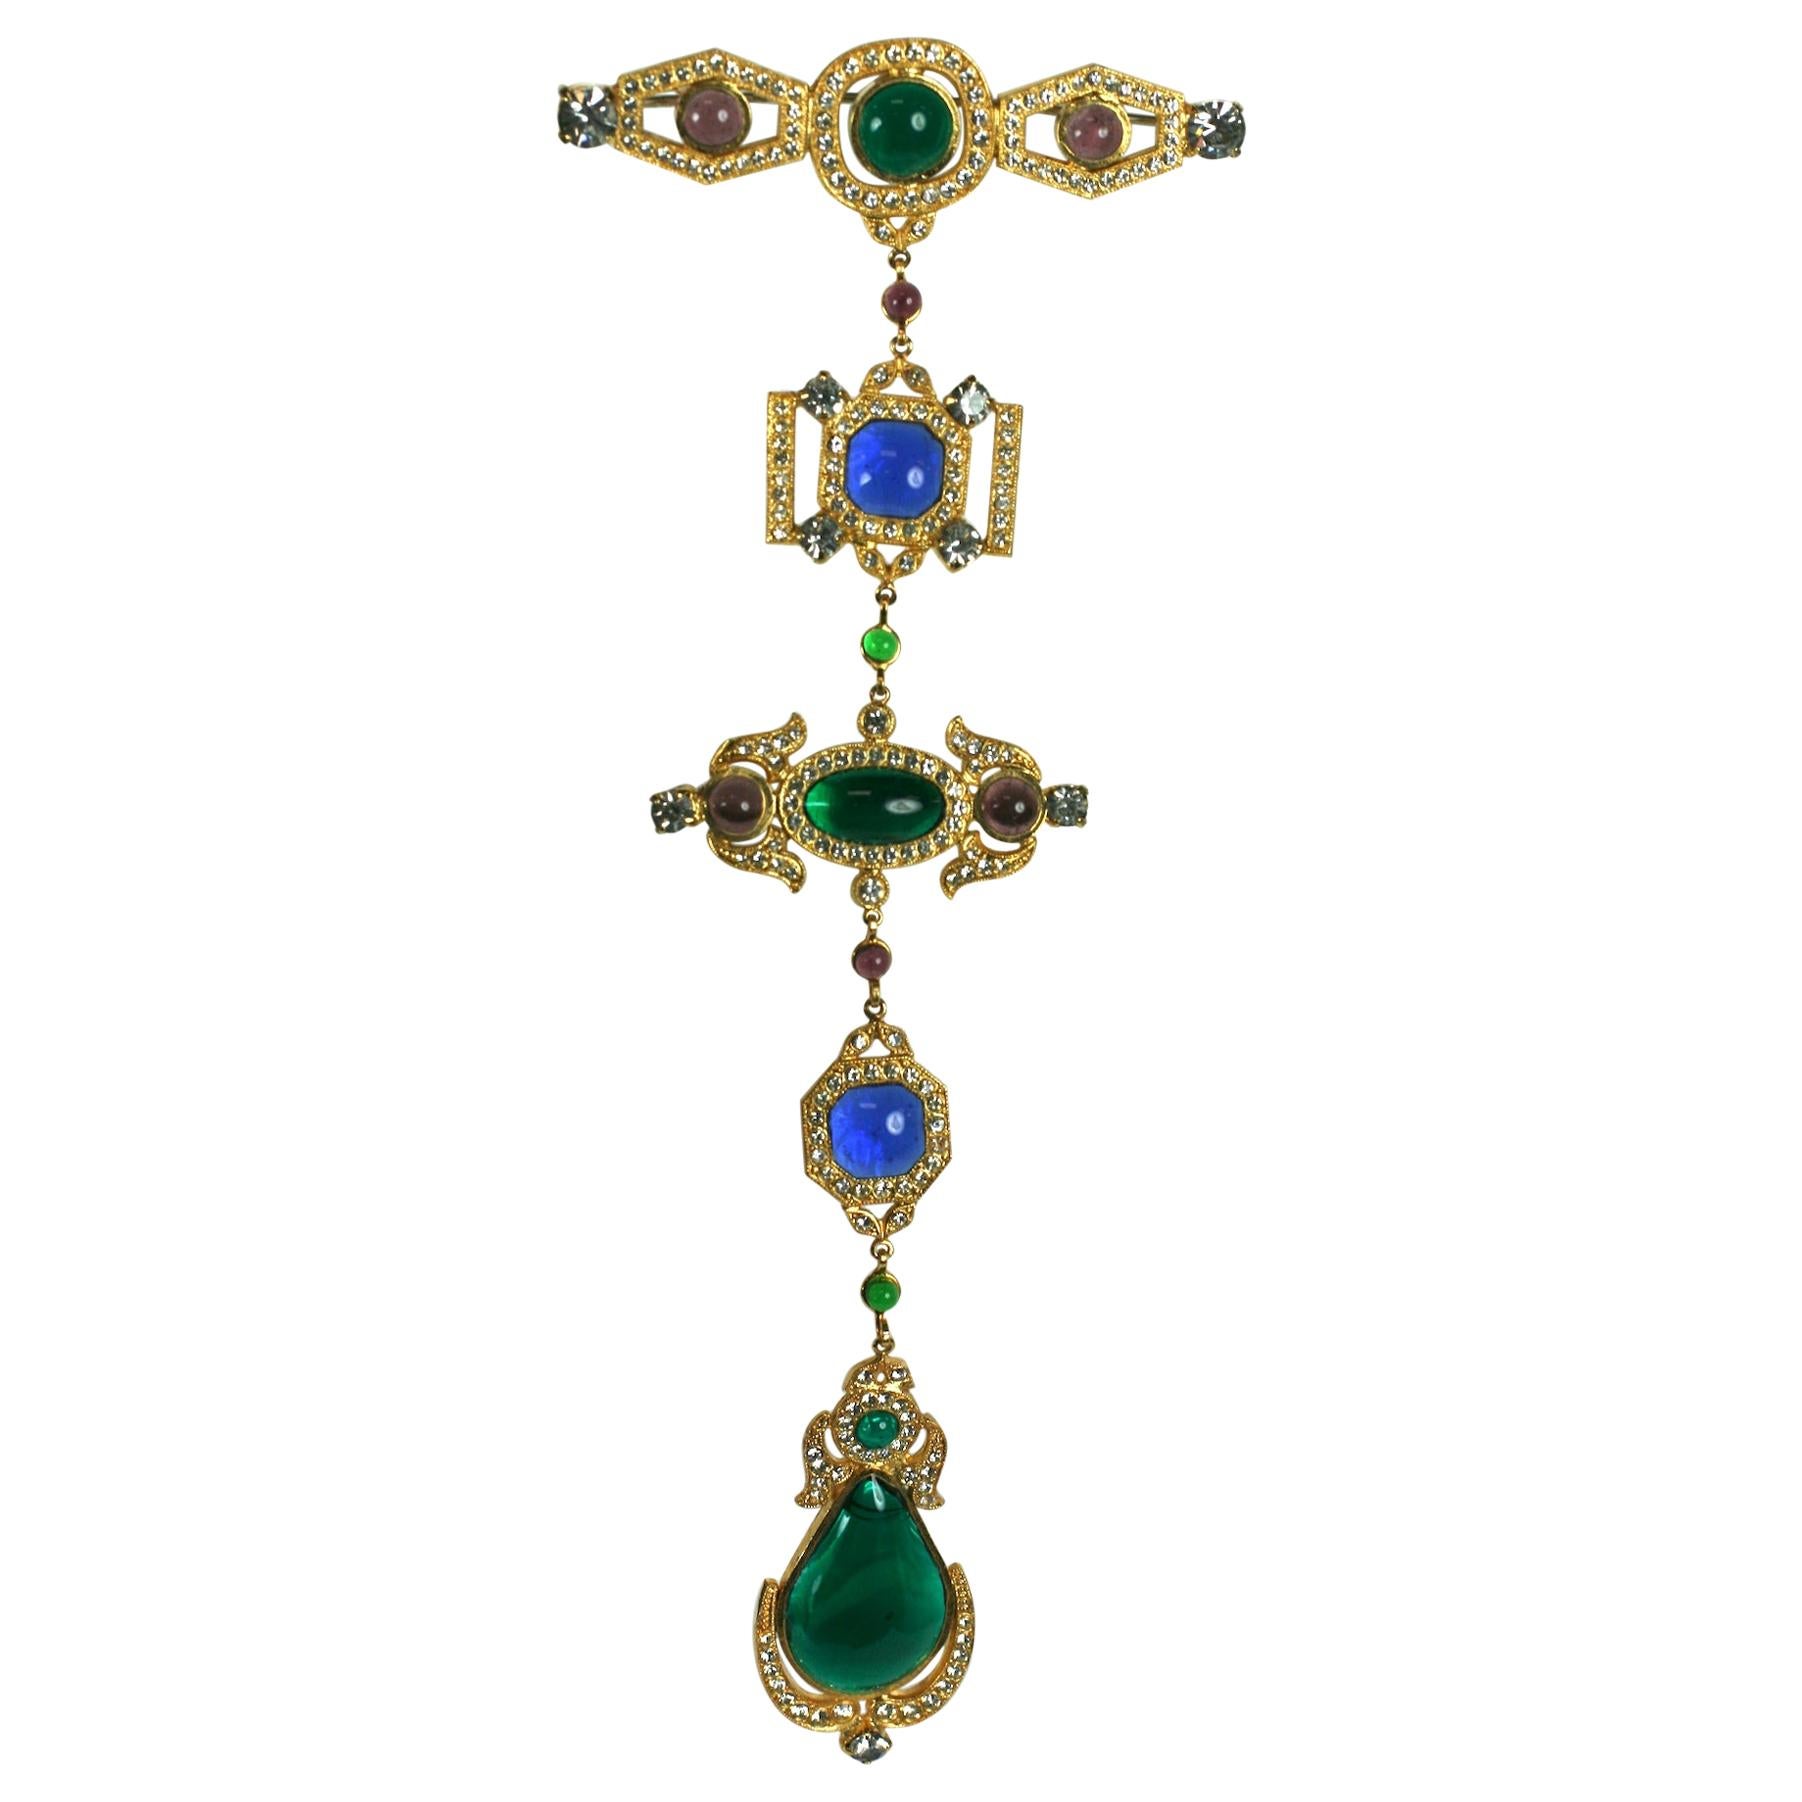 Exceptional Maison Gripoix for Chanel Regency  Brooch